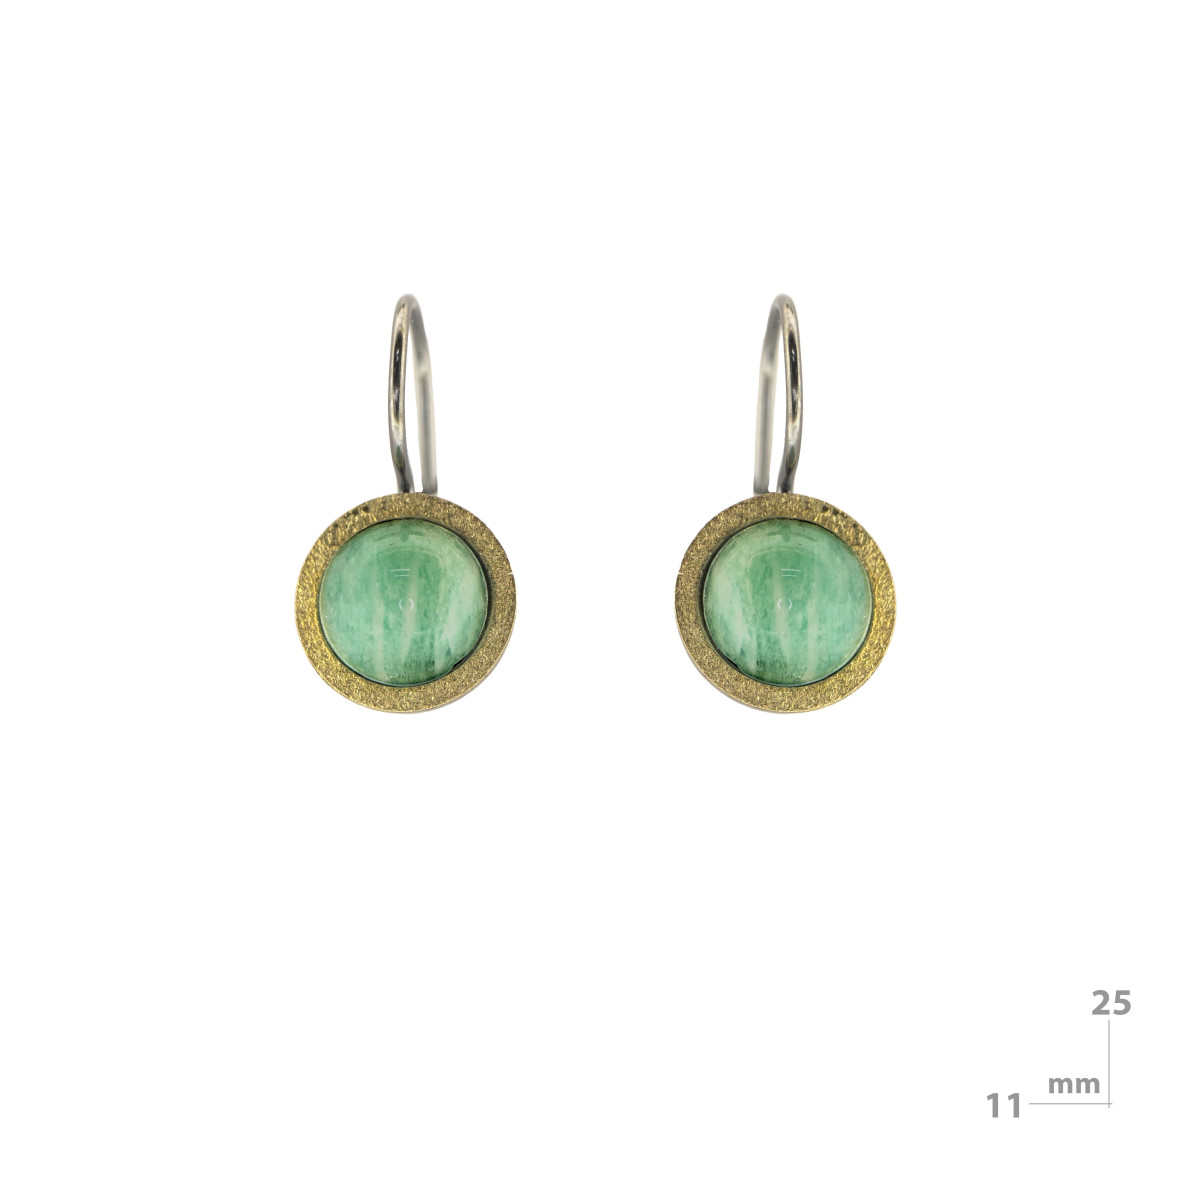 Silver, gold and amazonite earrings